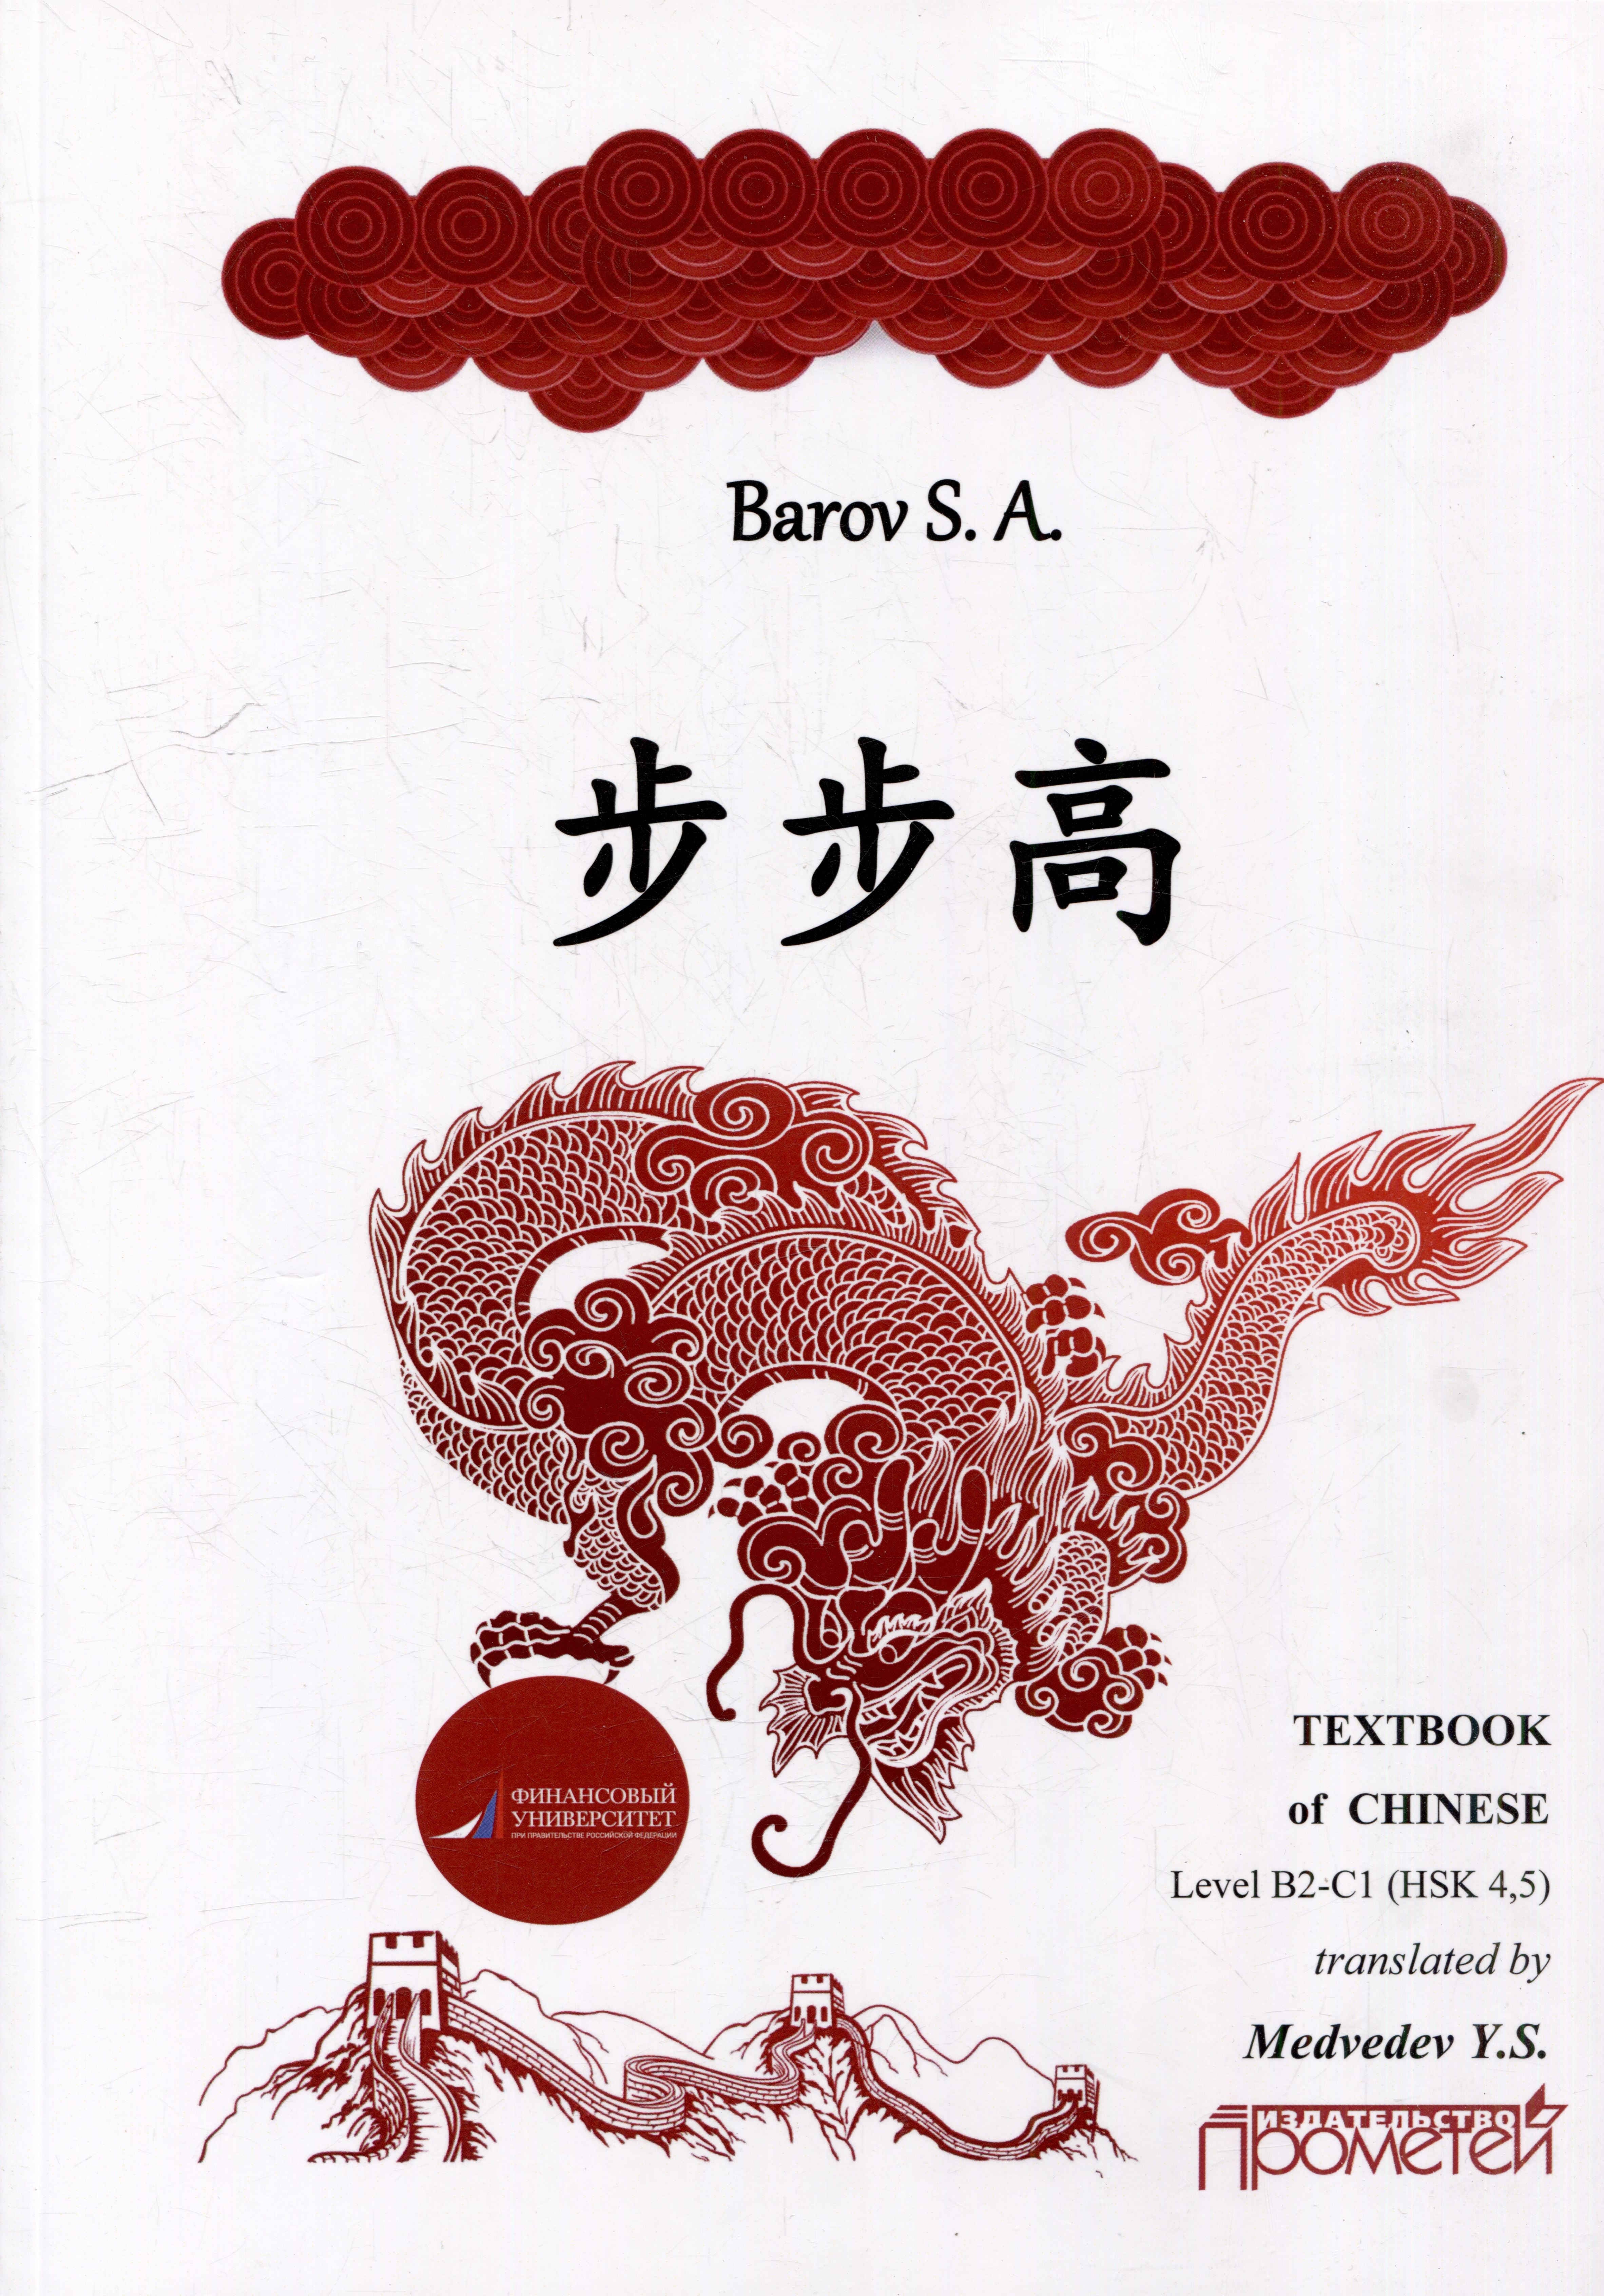 Textbook of Chinese («RISING STEP BY STEP») Level В2-С1 (HSK 4, 5) spoken chinese quick basics second edition english annotations ma jianfei learn chinese for foreigners chinese